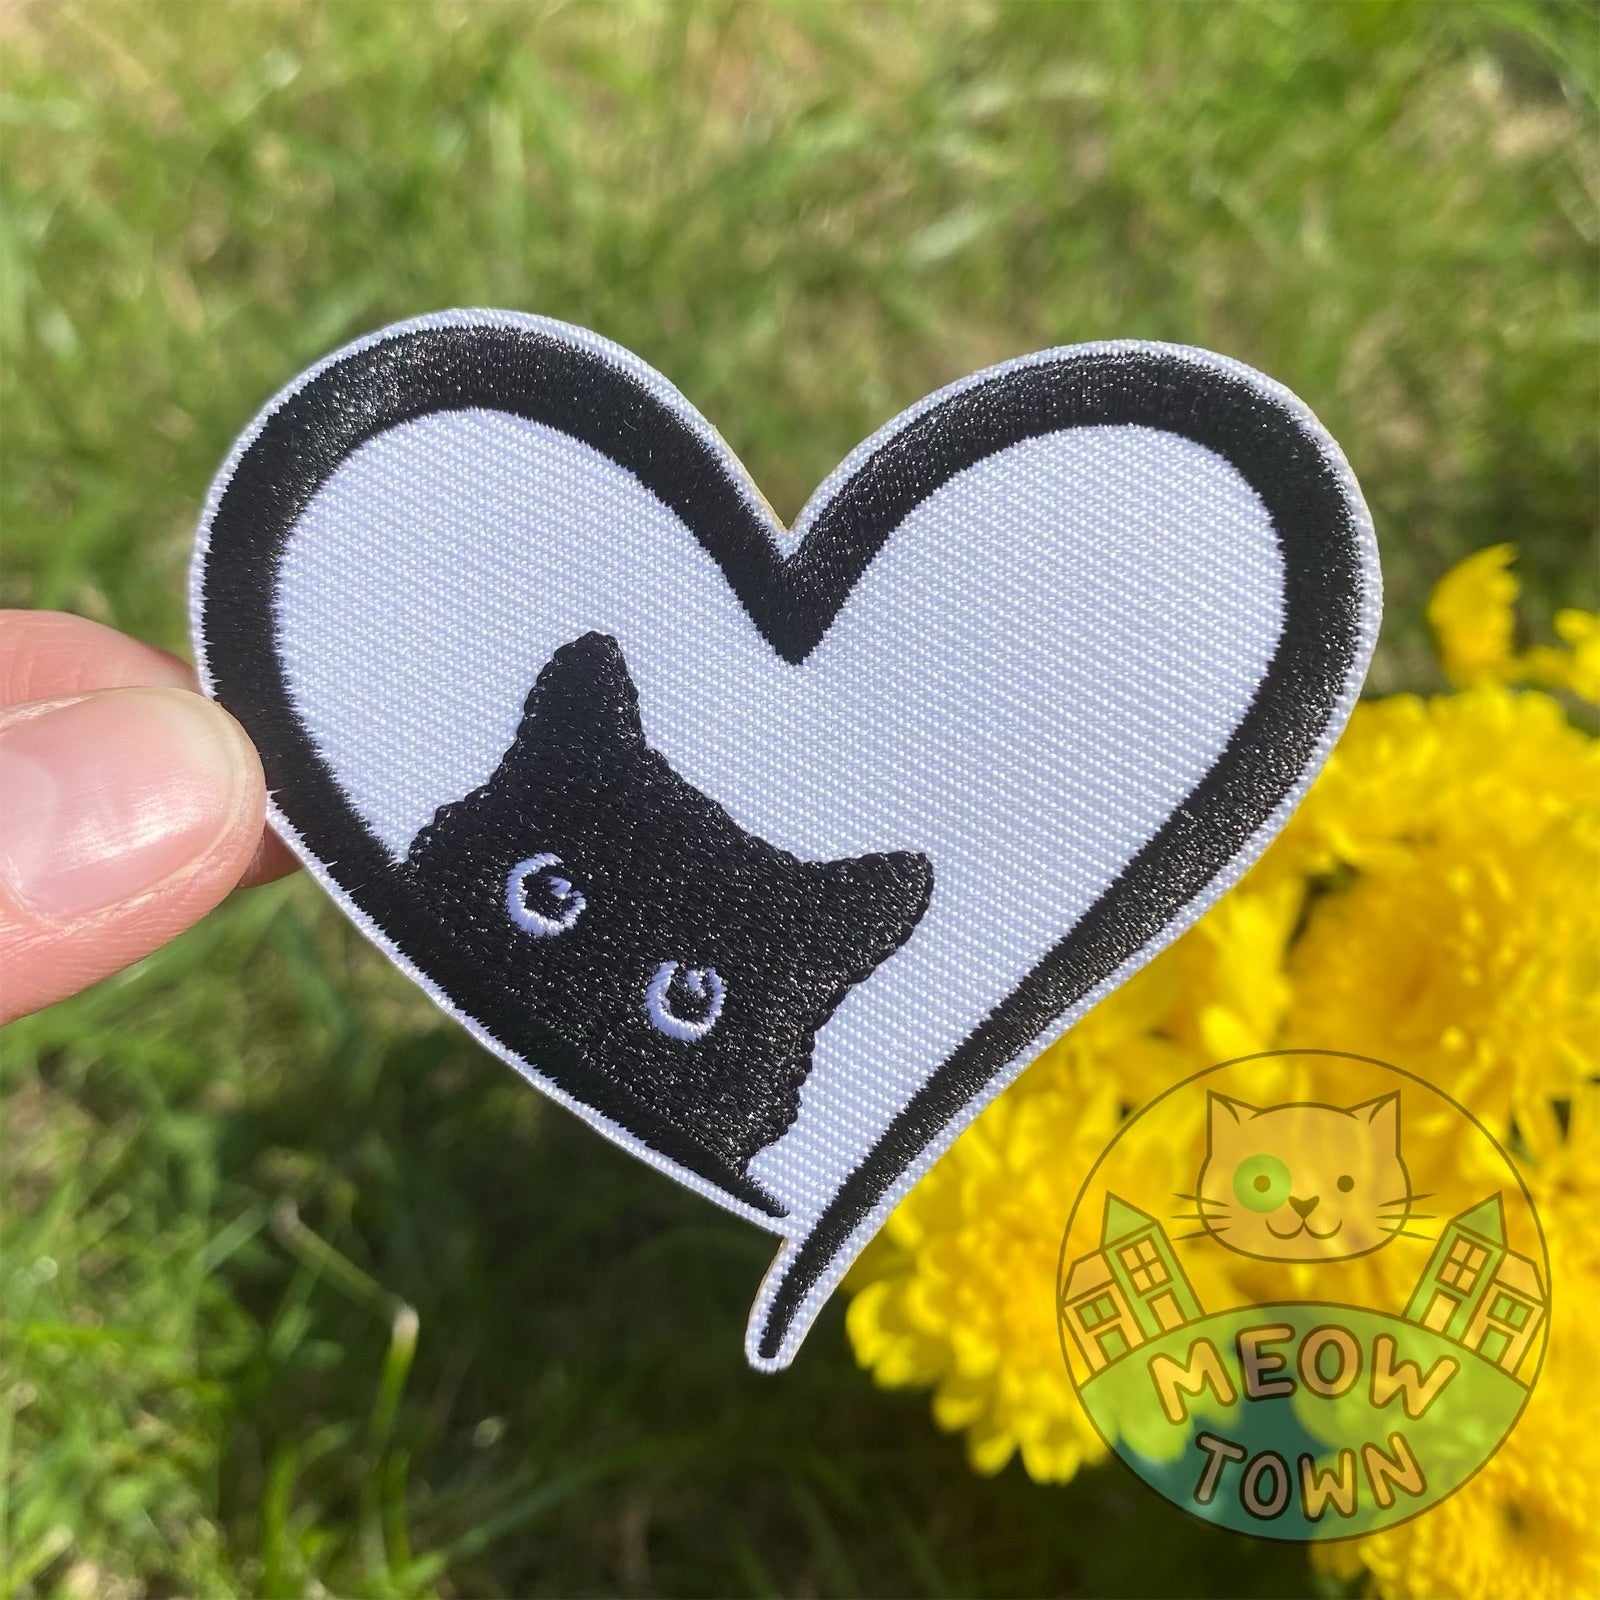 Adorable embroidered iron-on patch with a black kitty in a heart. A perfect way to bring new life to your old garments or to cover small holes or marks with this cute kitty!